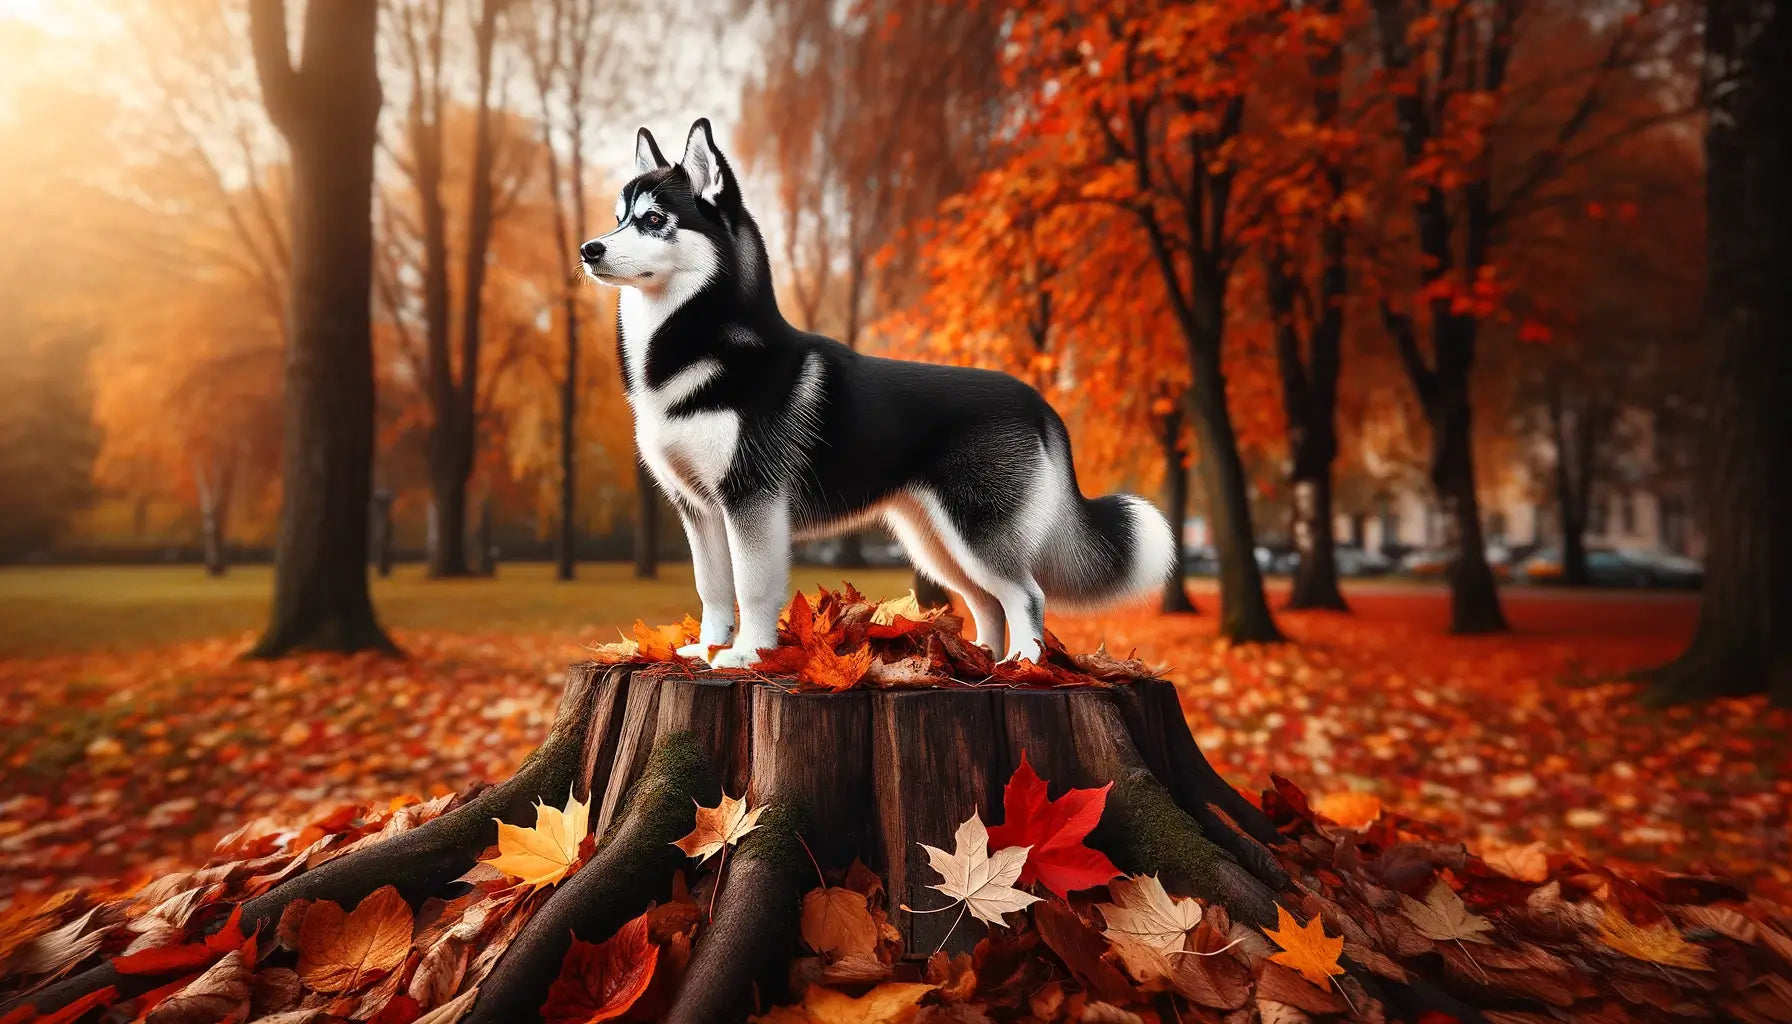 A Huskyhuahua perched on a tree stump amidst autumn leaves, displaying the black and white coloring of a Husky combined with the more compact, lean body.